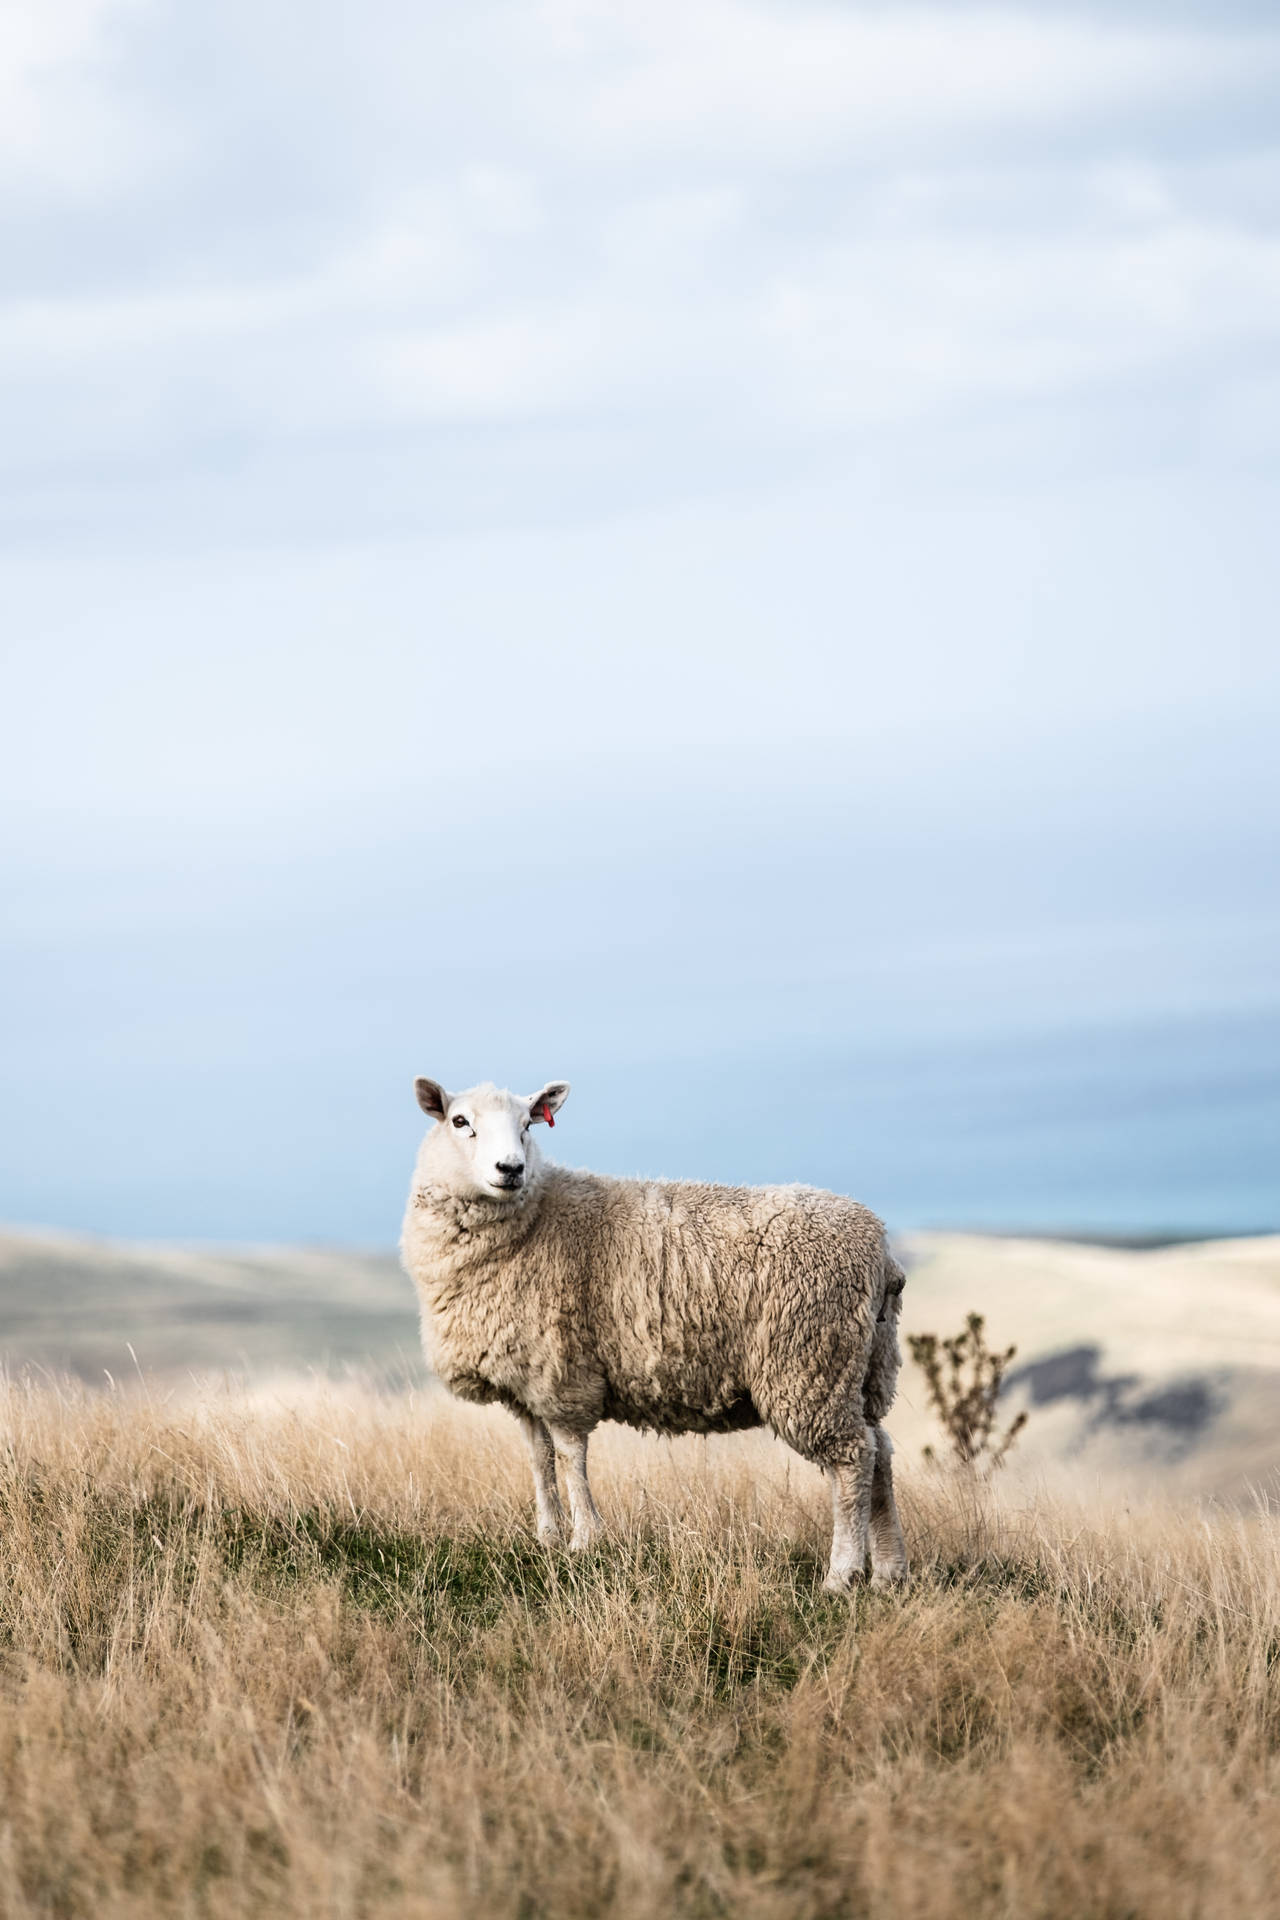 Fluffy White Sheep On Field Background